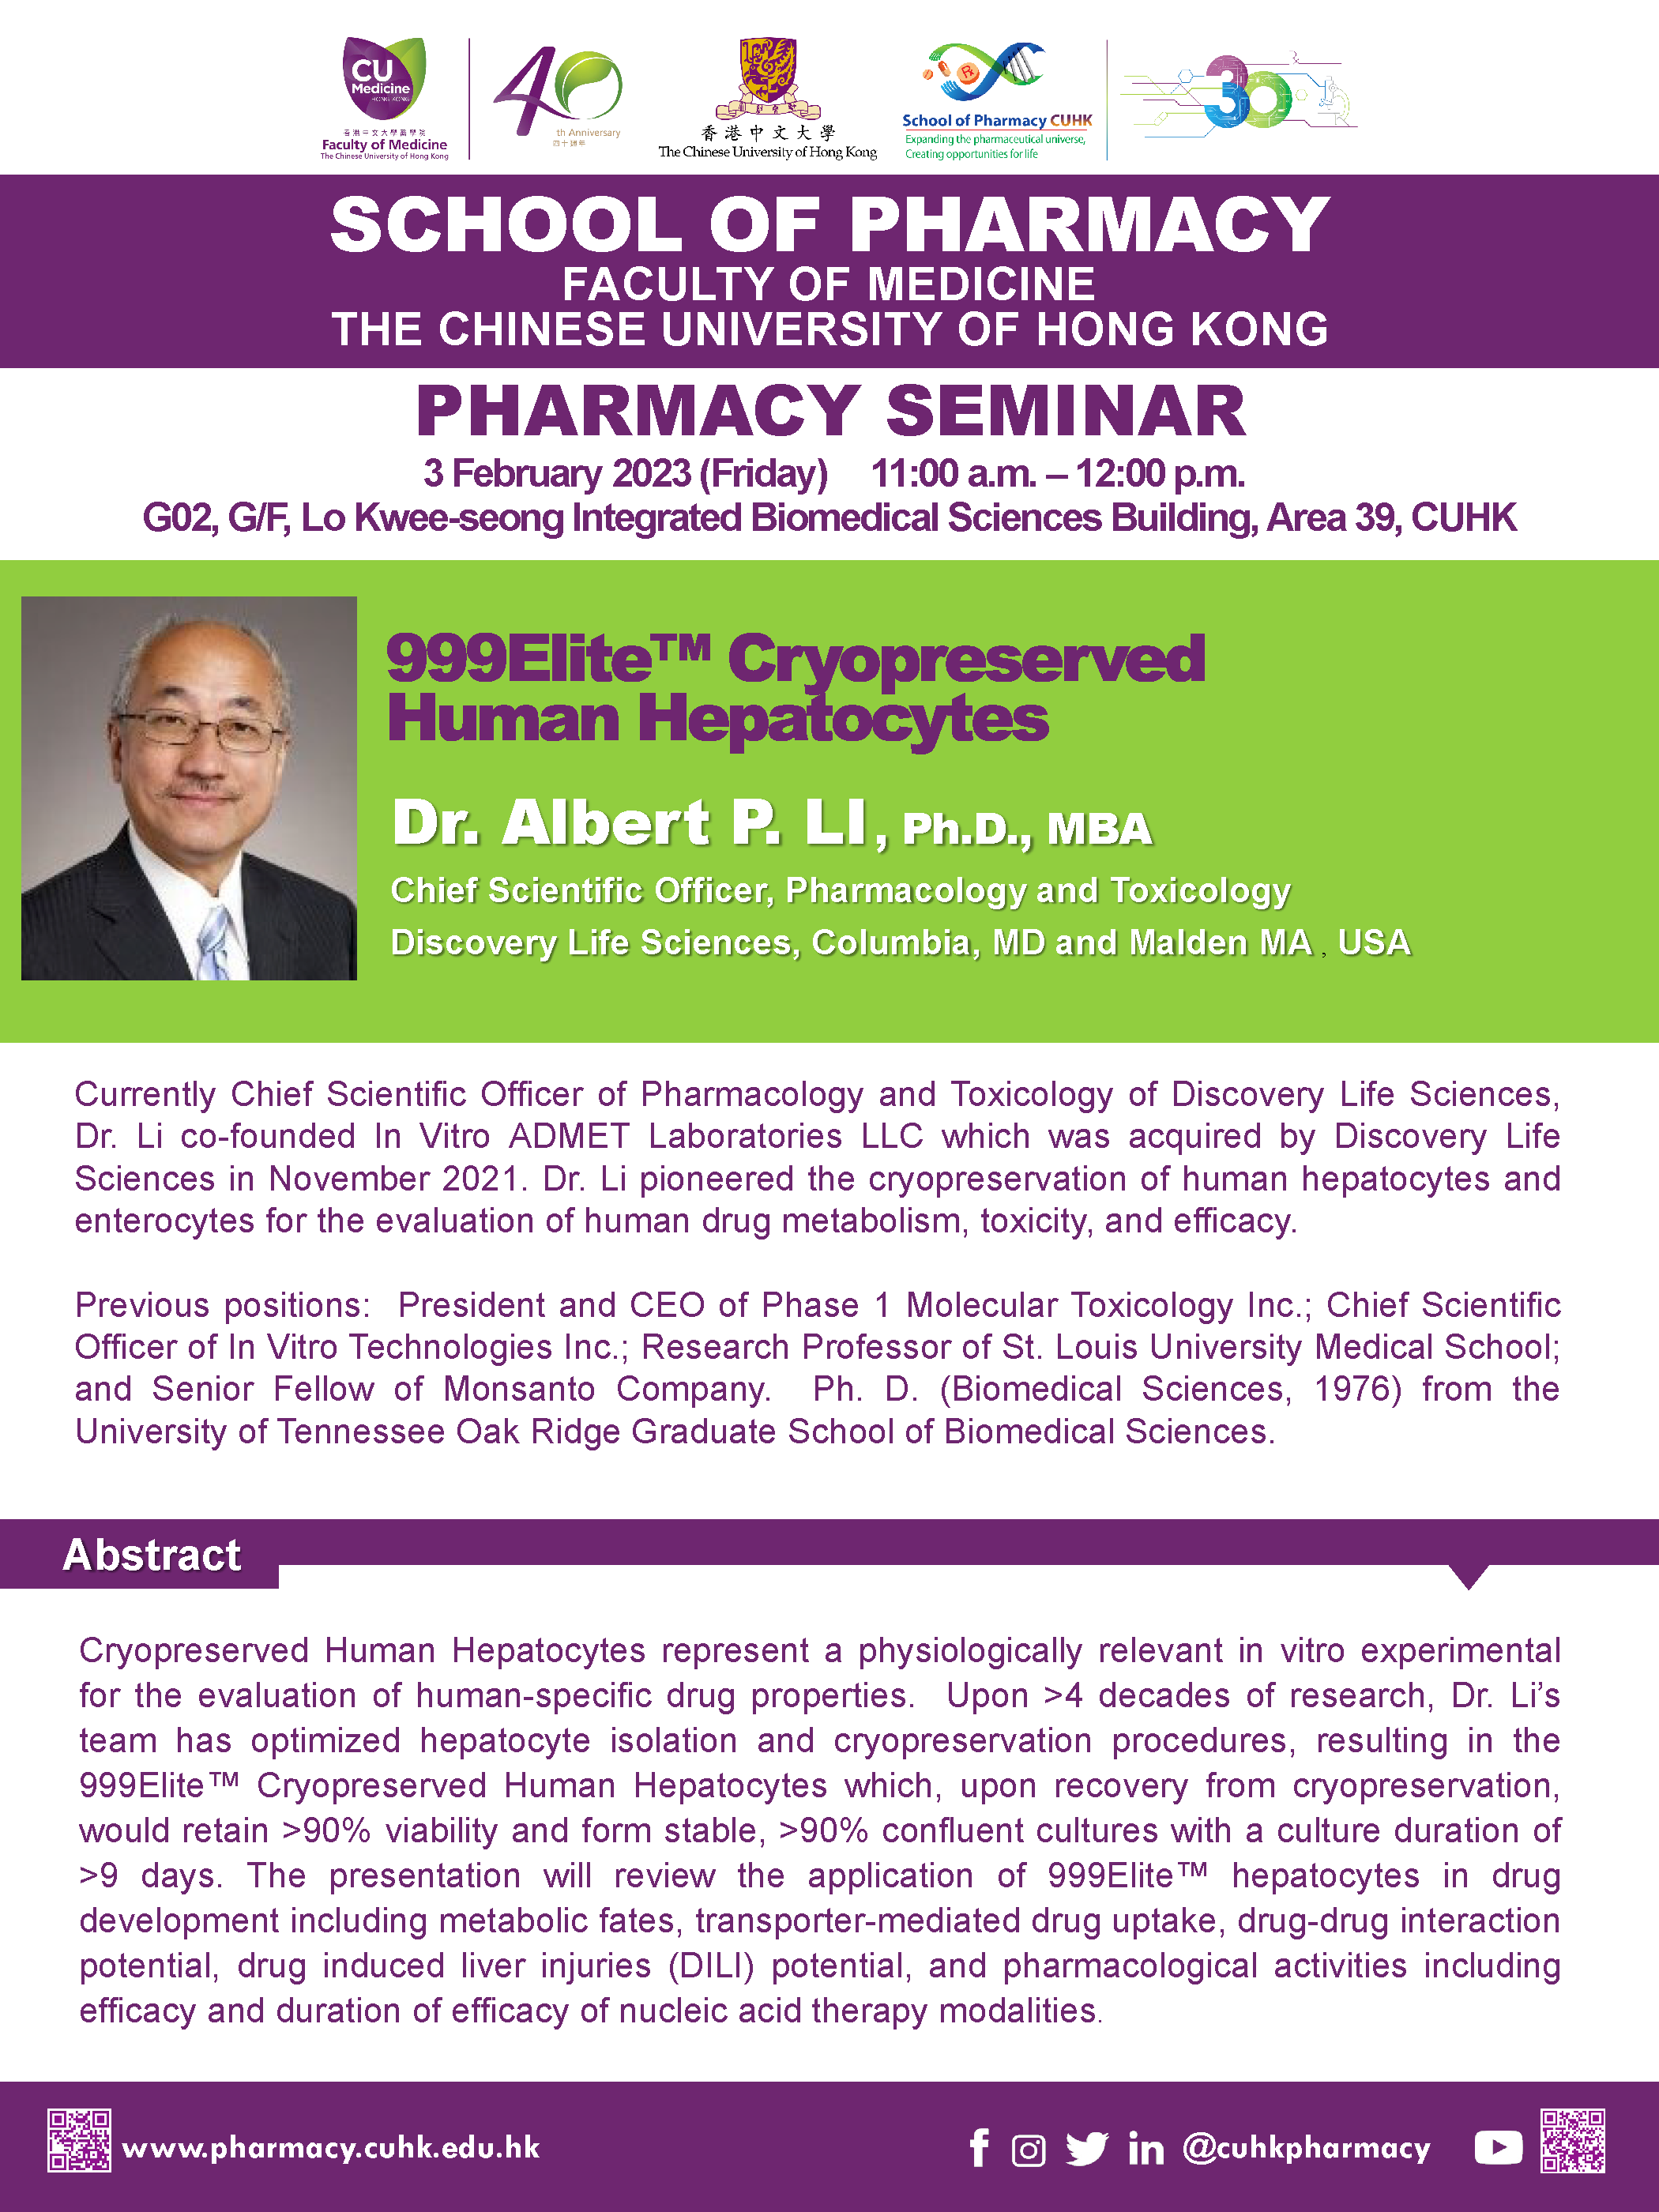 "999Elite™ Cryopreserved Human Hepatocytes" by Dr. Albert Li from Discovery Life Sciences, Columbia, USA